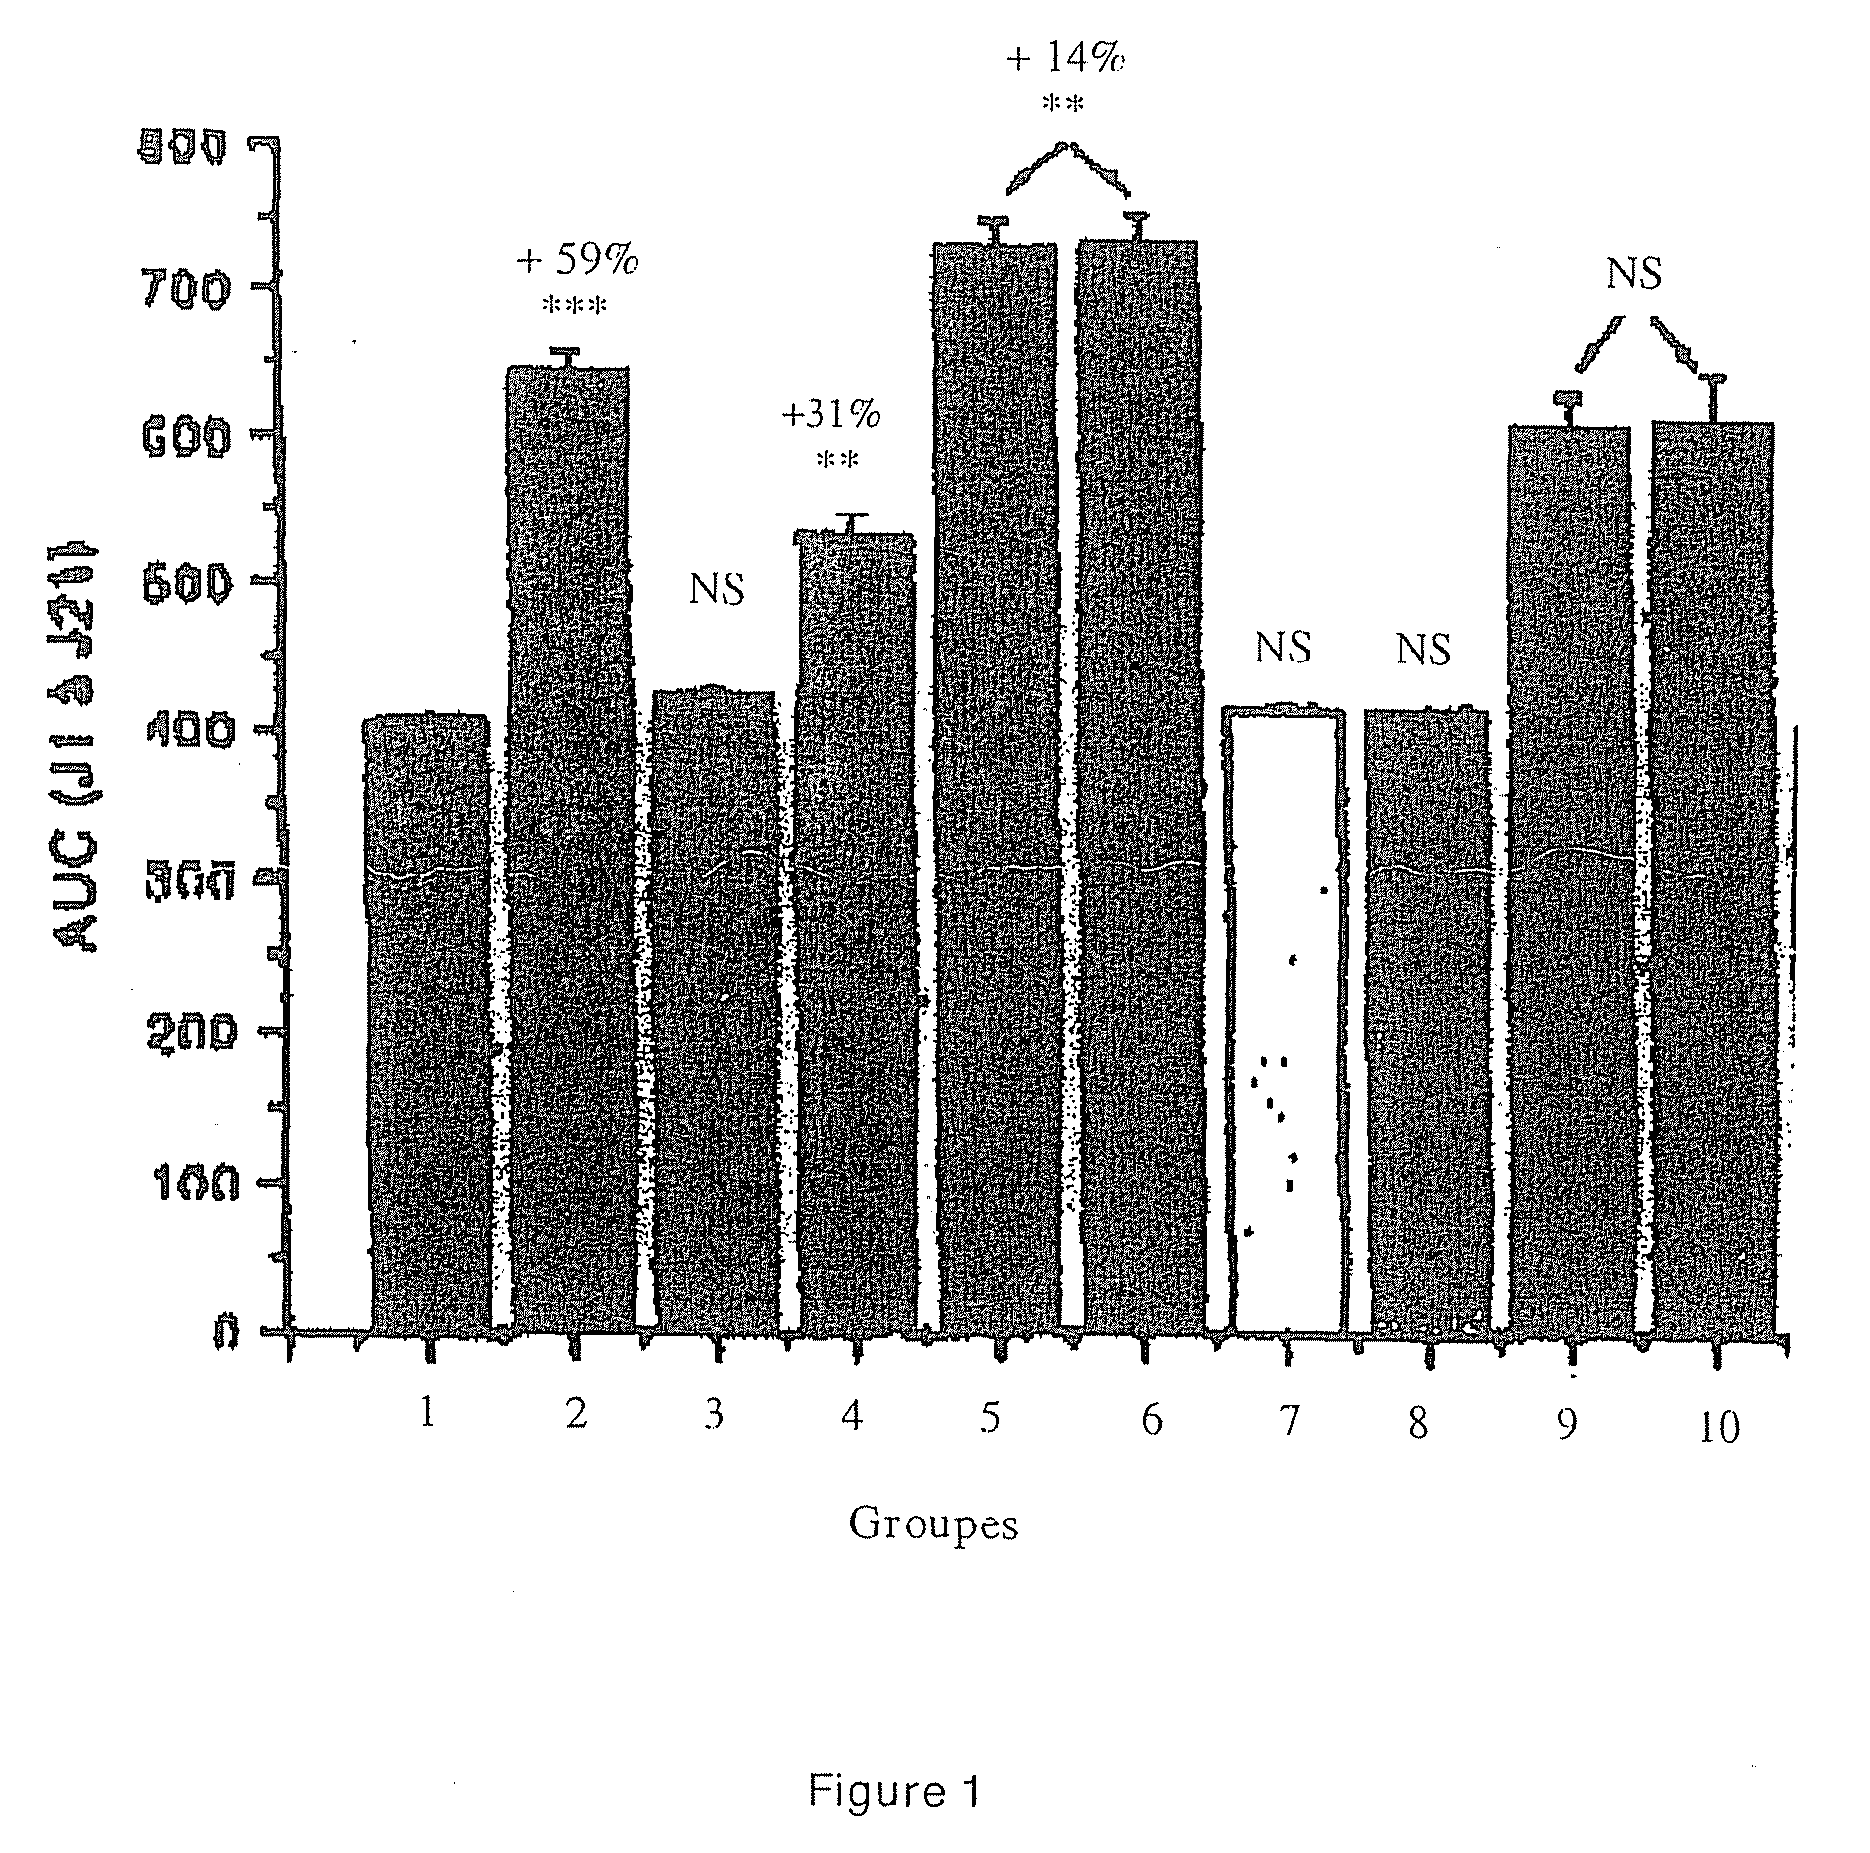 Reduced-irritant dermatological compositions comprising at least one naphthoic acid compound and benzoyl peroxide and treatment of keratinization disorders therewith